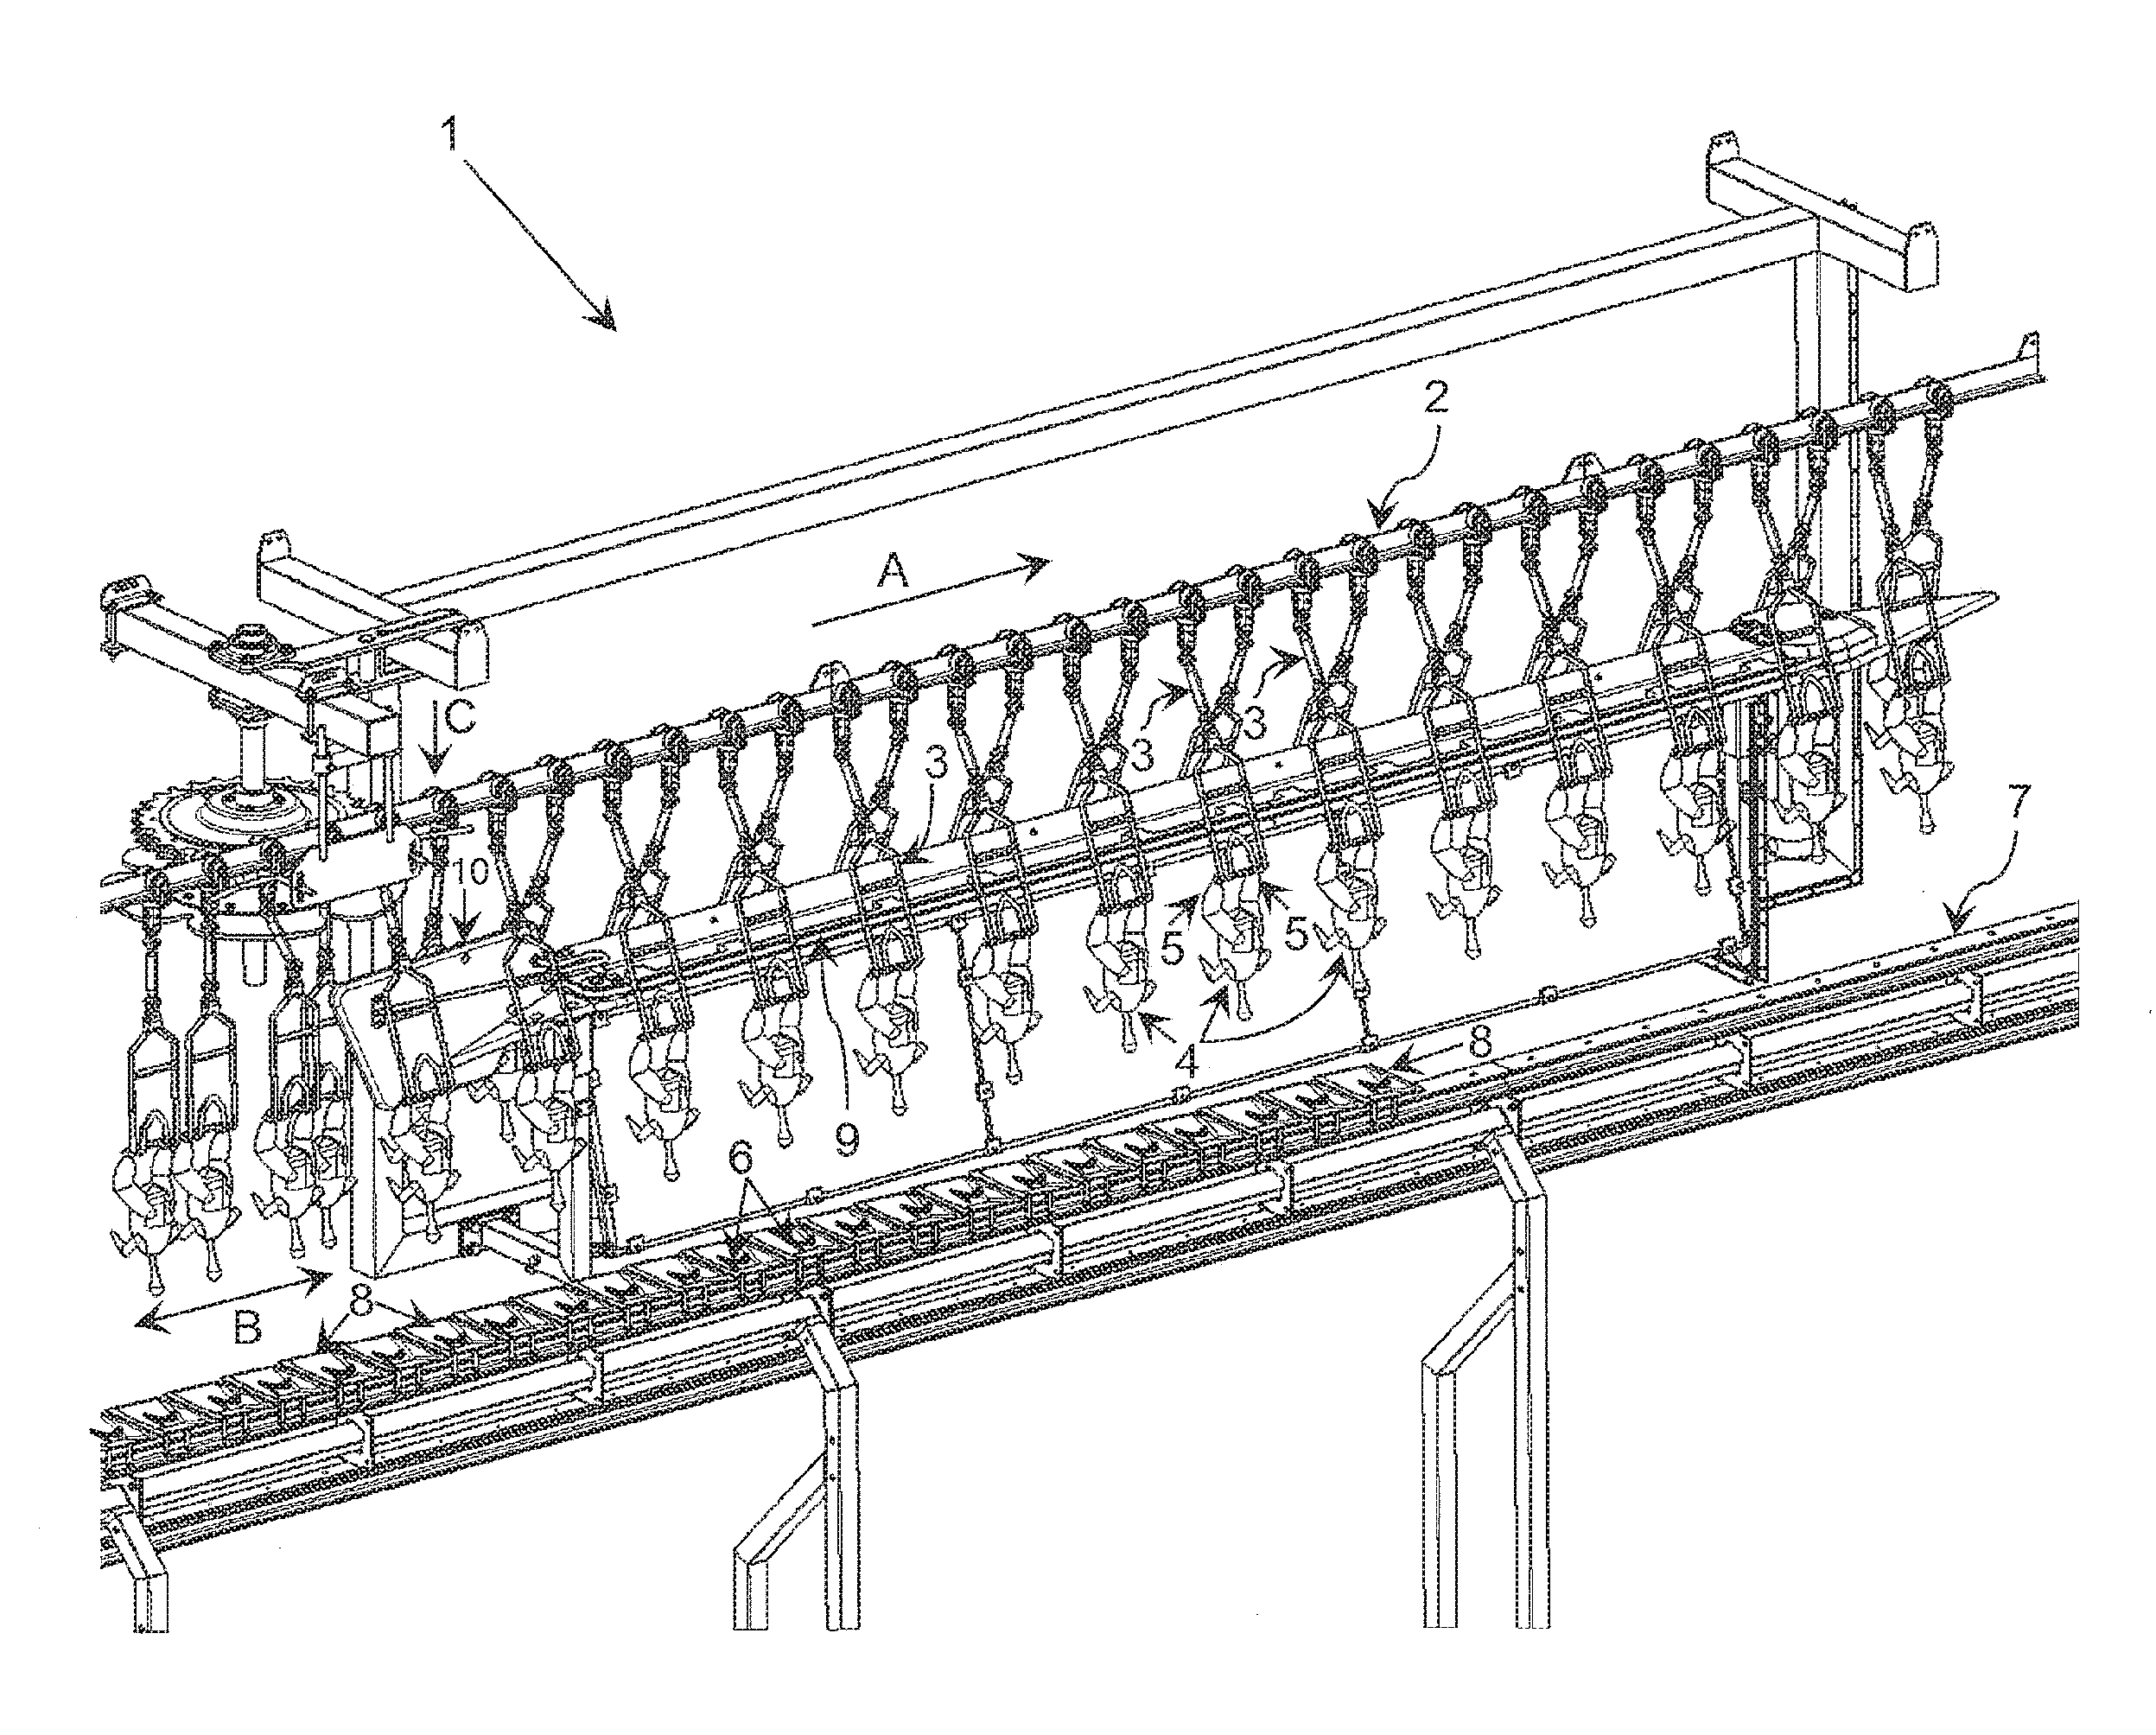 Processing and/or inspection line for poultry suspended by the legs